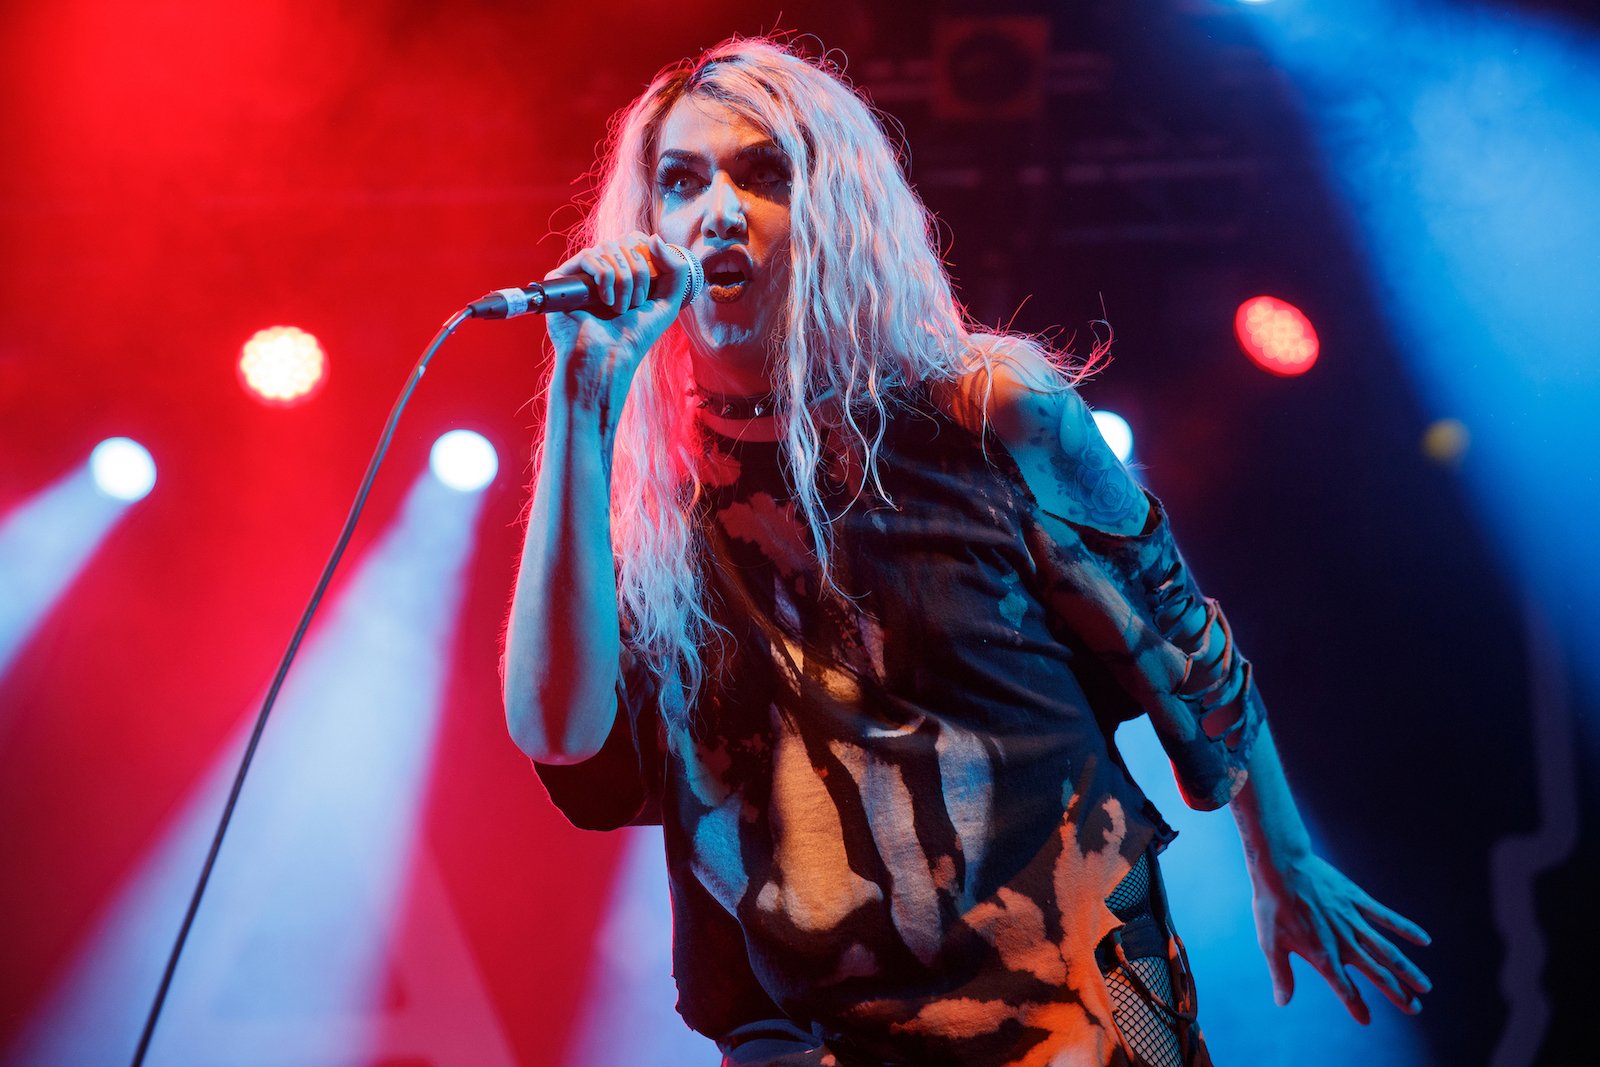 Former 'RuPaul's Drag Race' contestant Adore Delano performs on stage